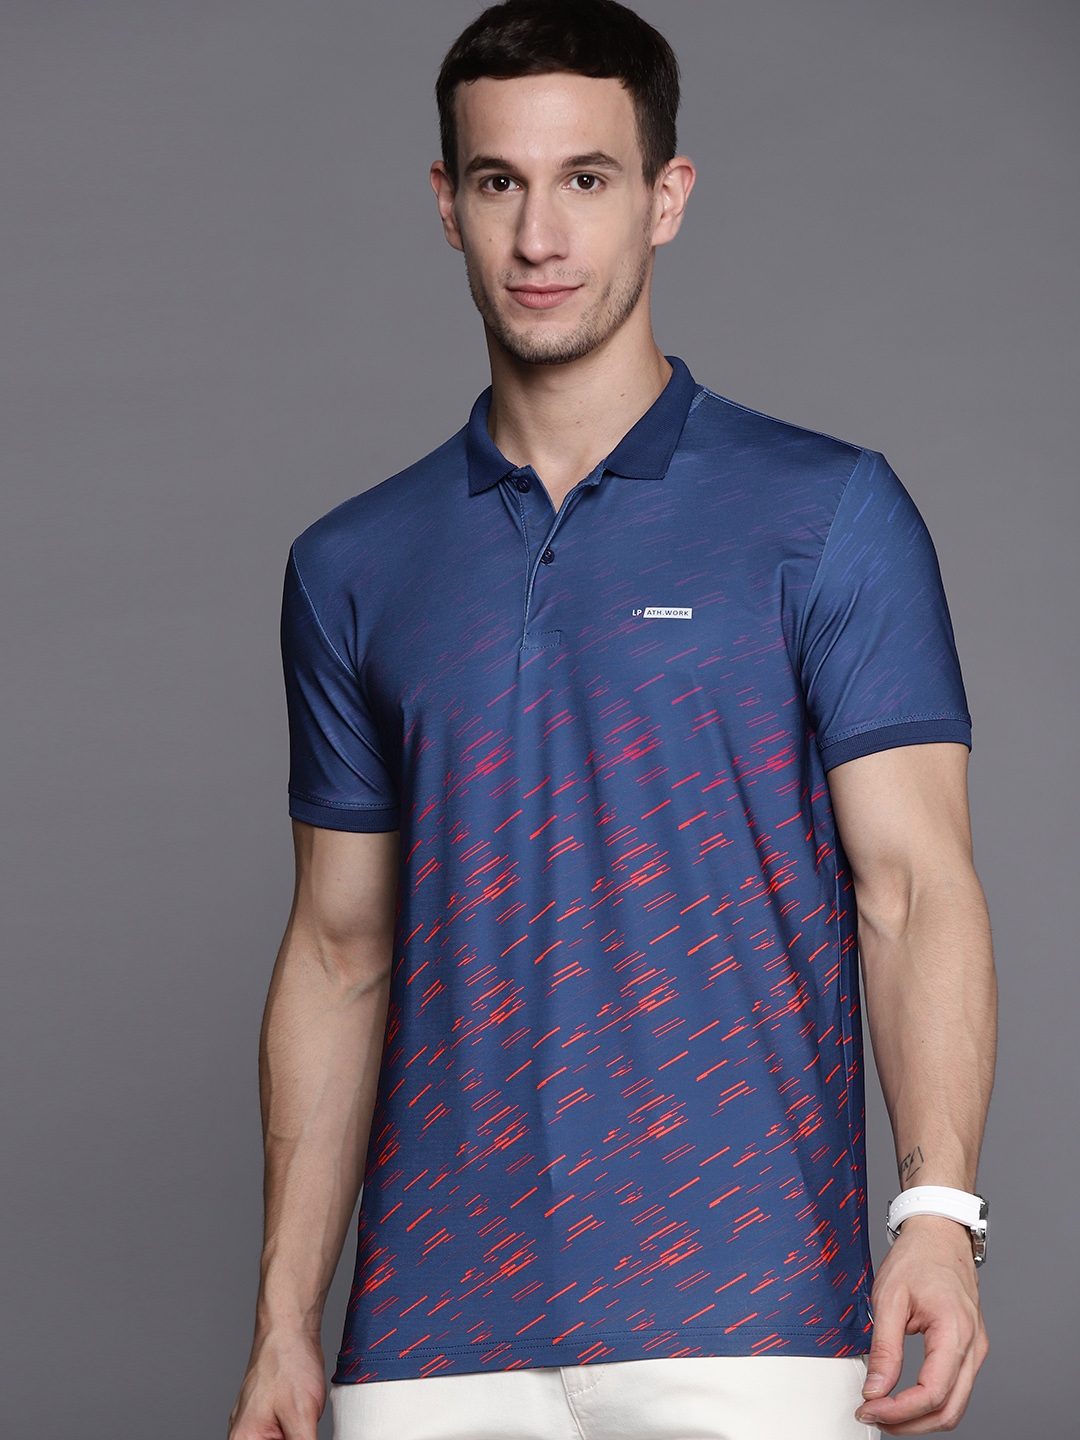 Louis Philippe Ath.Work Striped Men Polo Neck Blue T-Shirt - Buy Louis  Philippe Ath.Work Striped Men Polo Neck Blue T-Shirt Online at Best Prices  in India